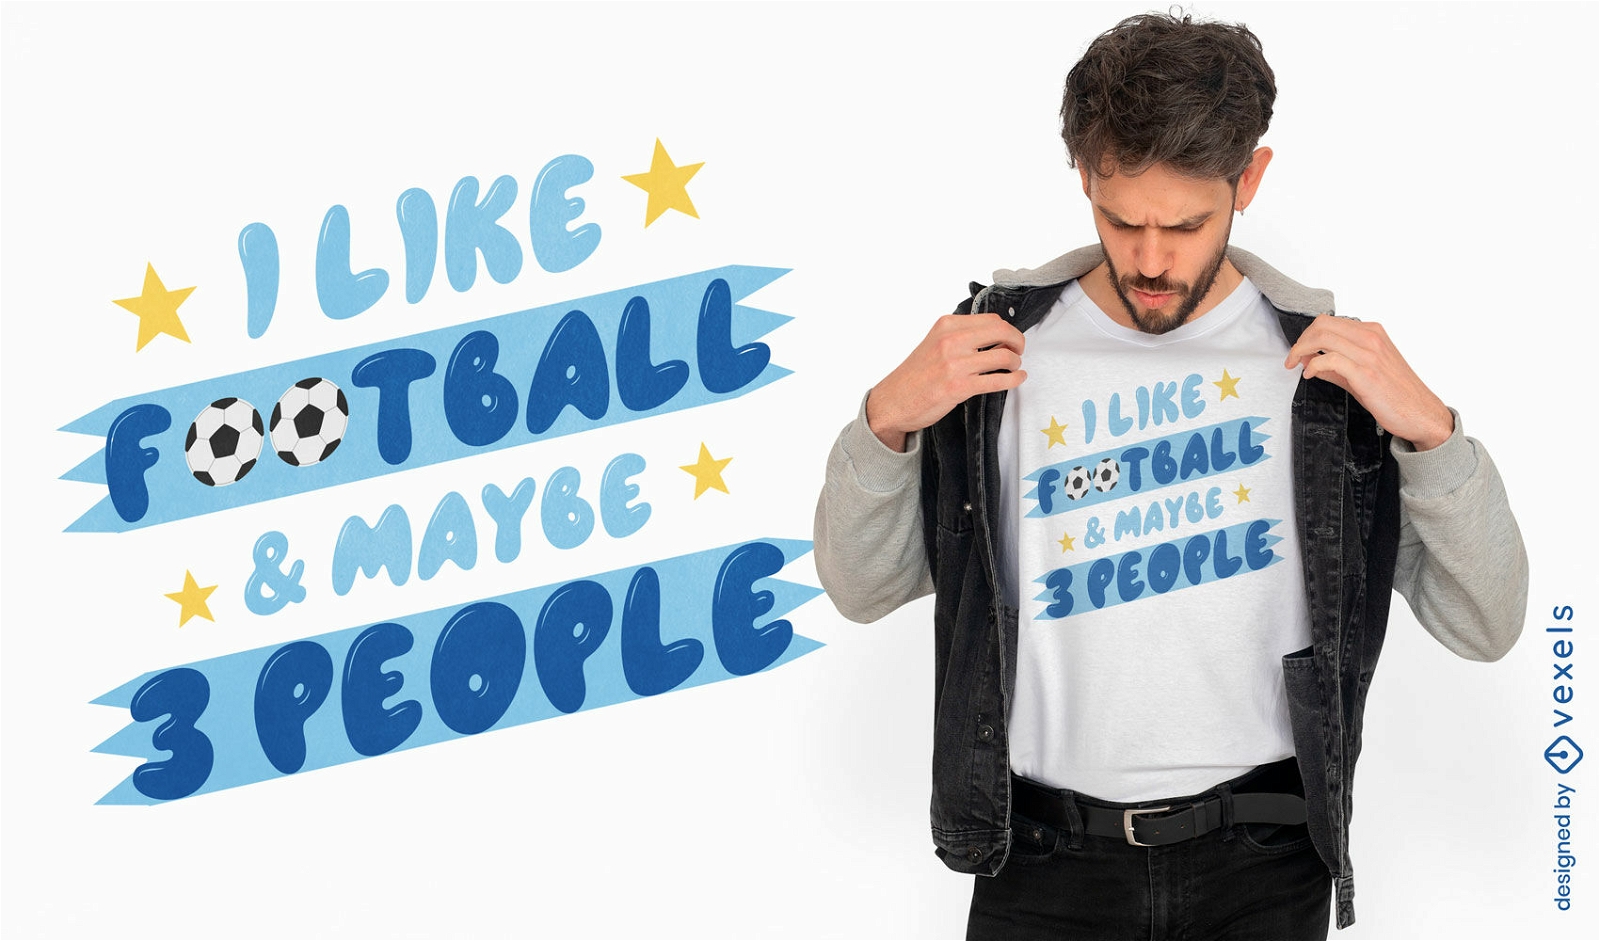 Funny football quote t-shirt design